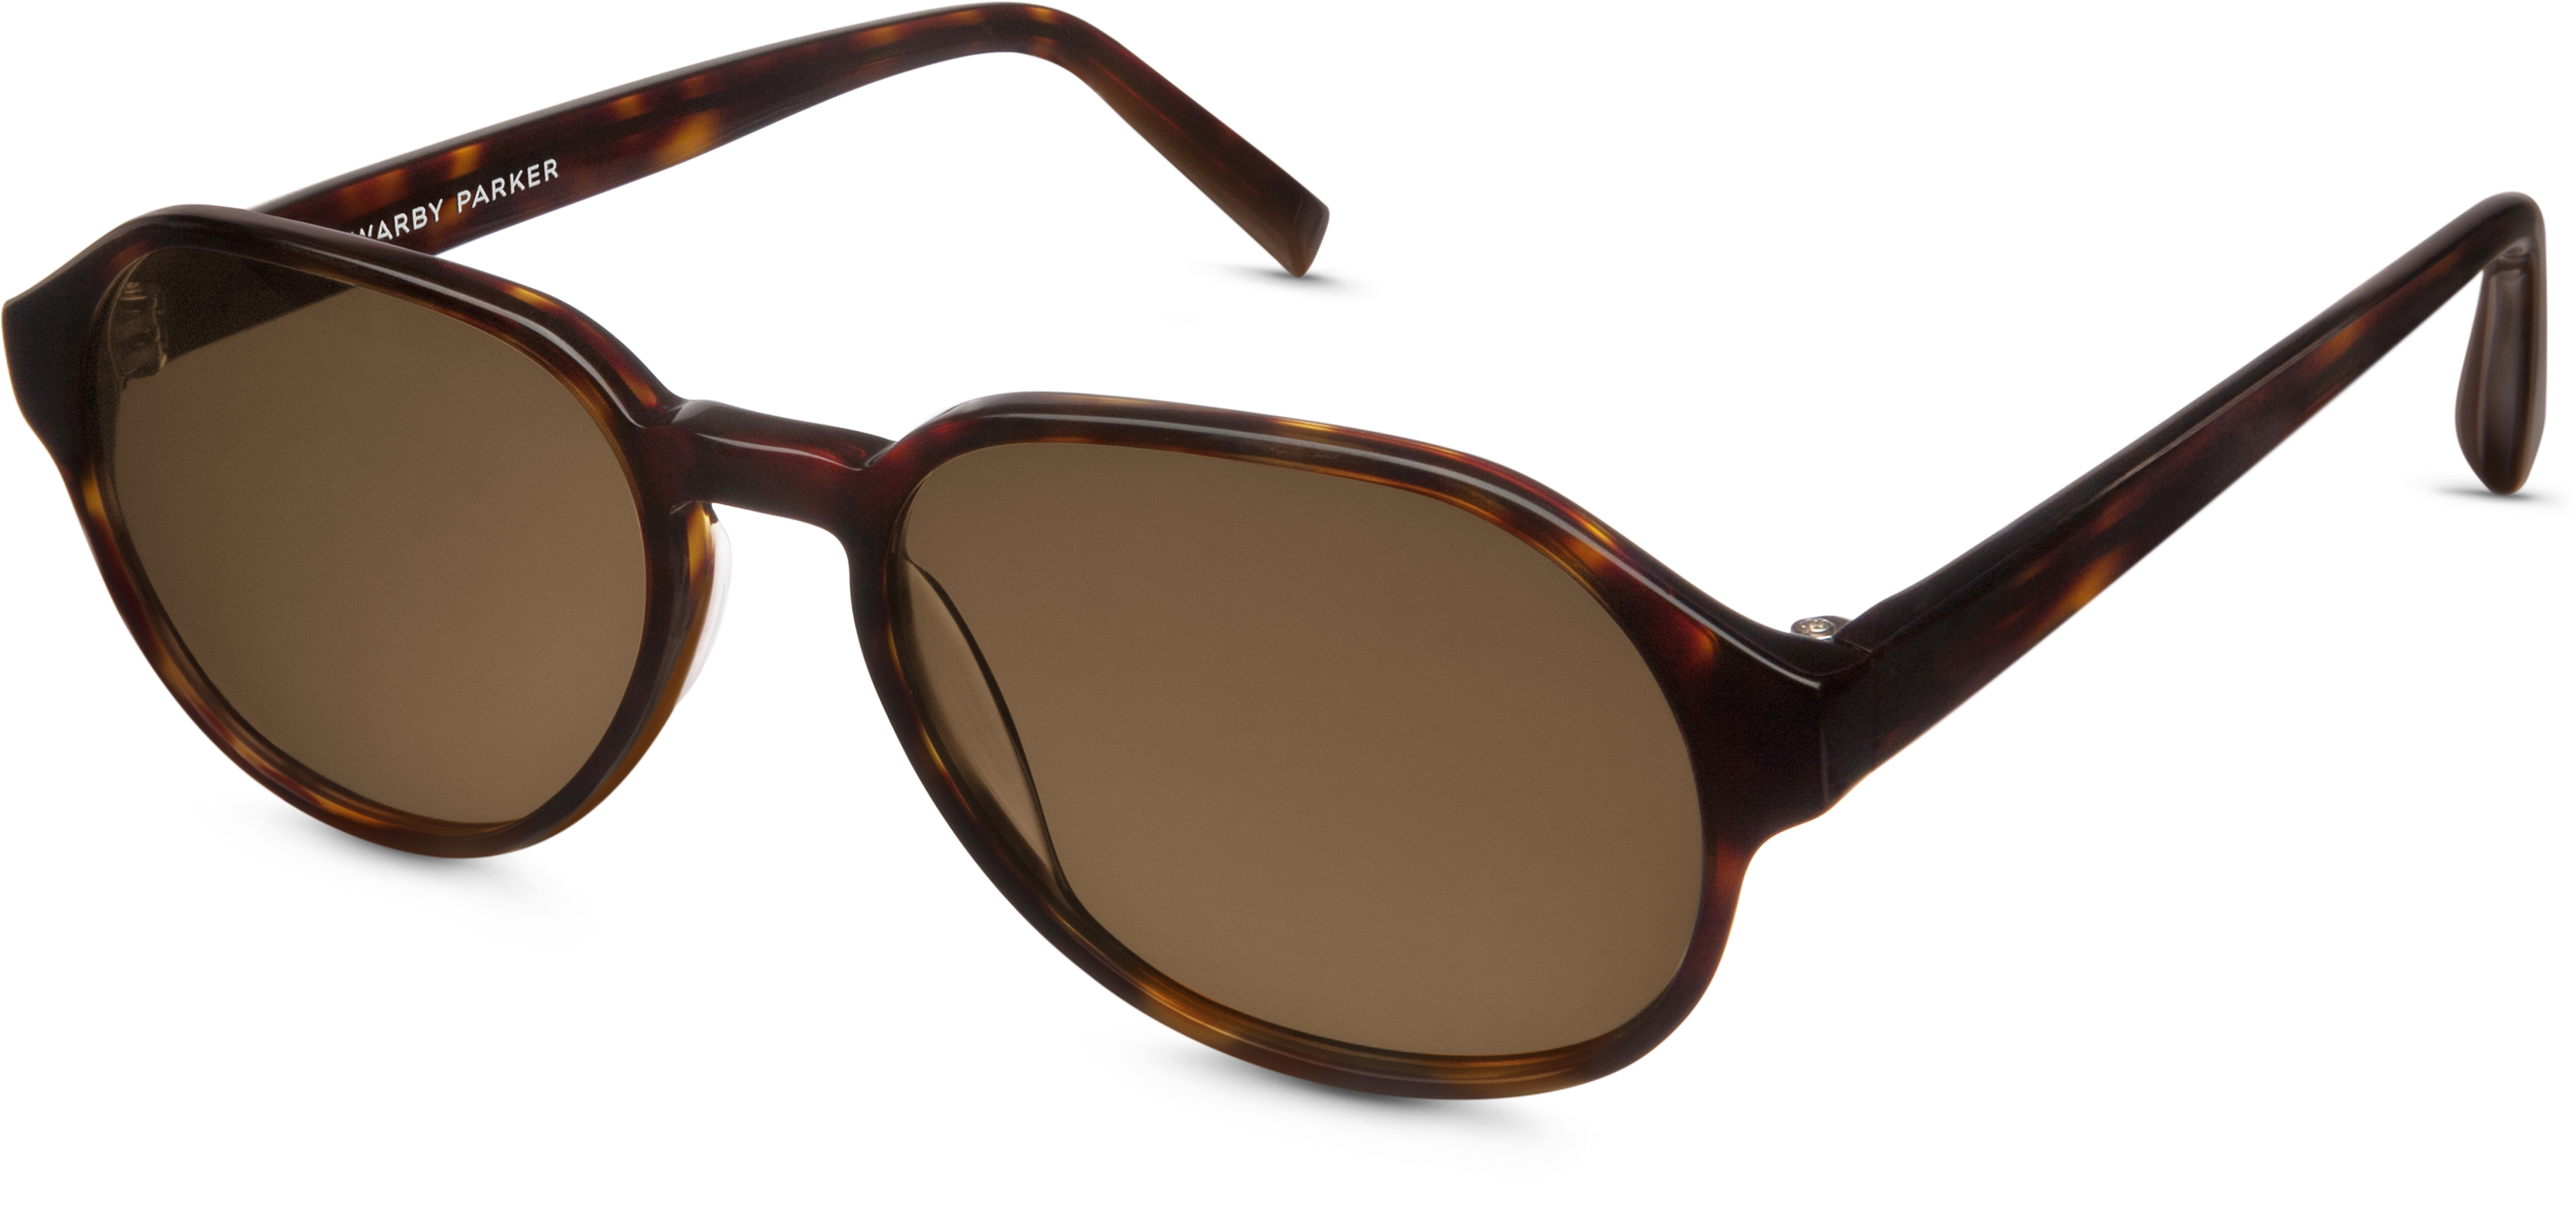 Warby Parker Oxley in Cognac-Tortoise (Brown) for Men - Lyst